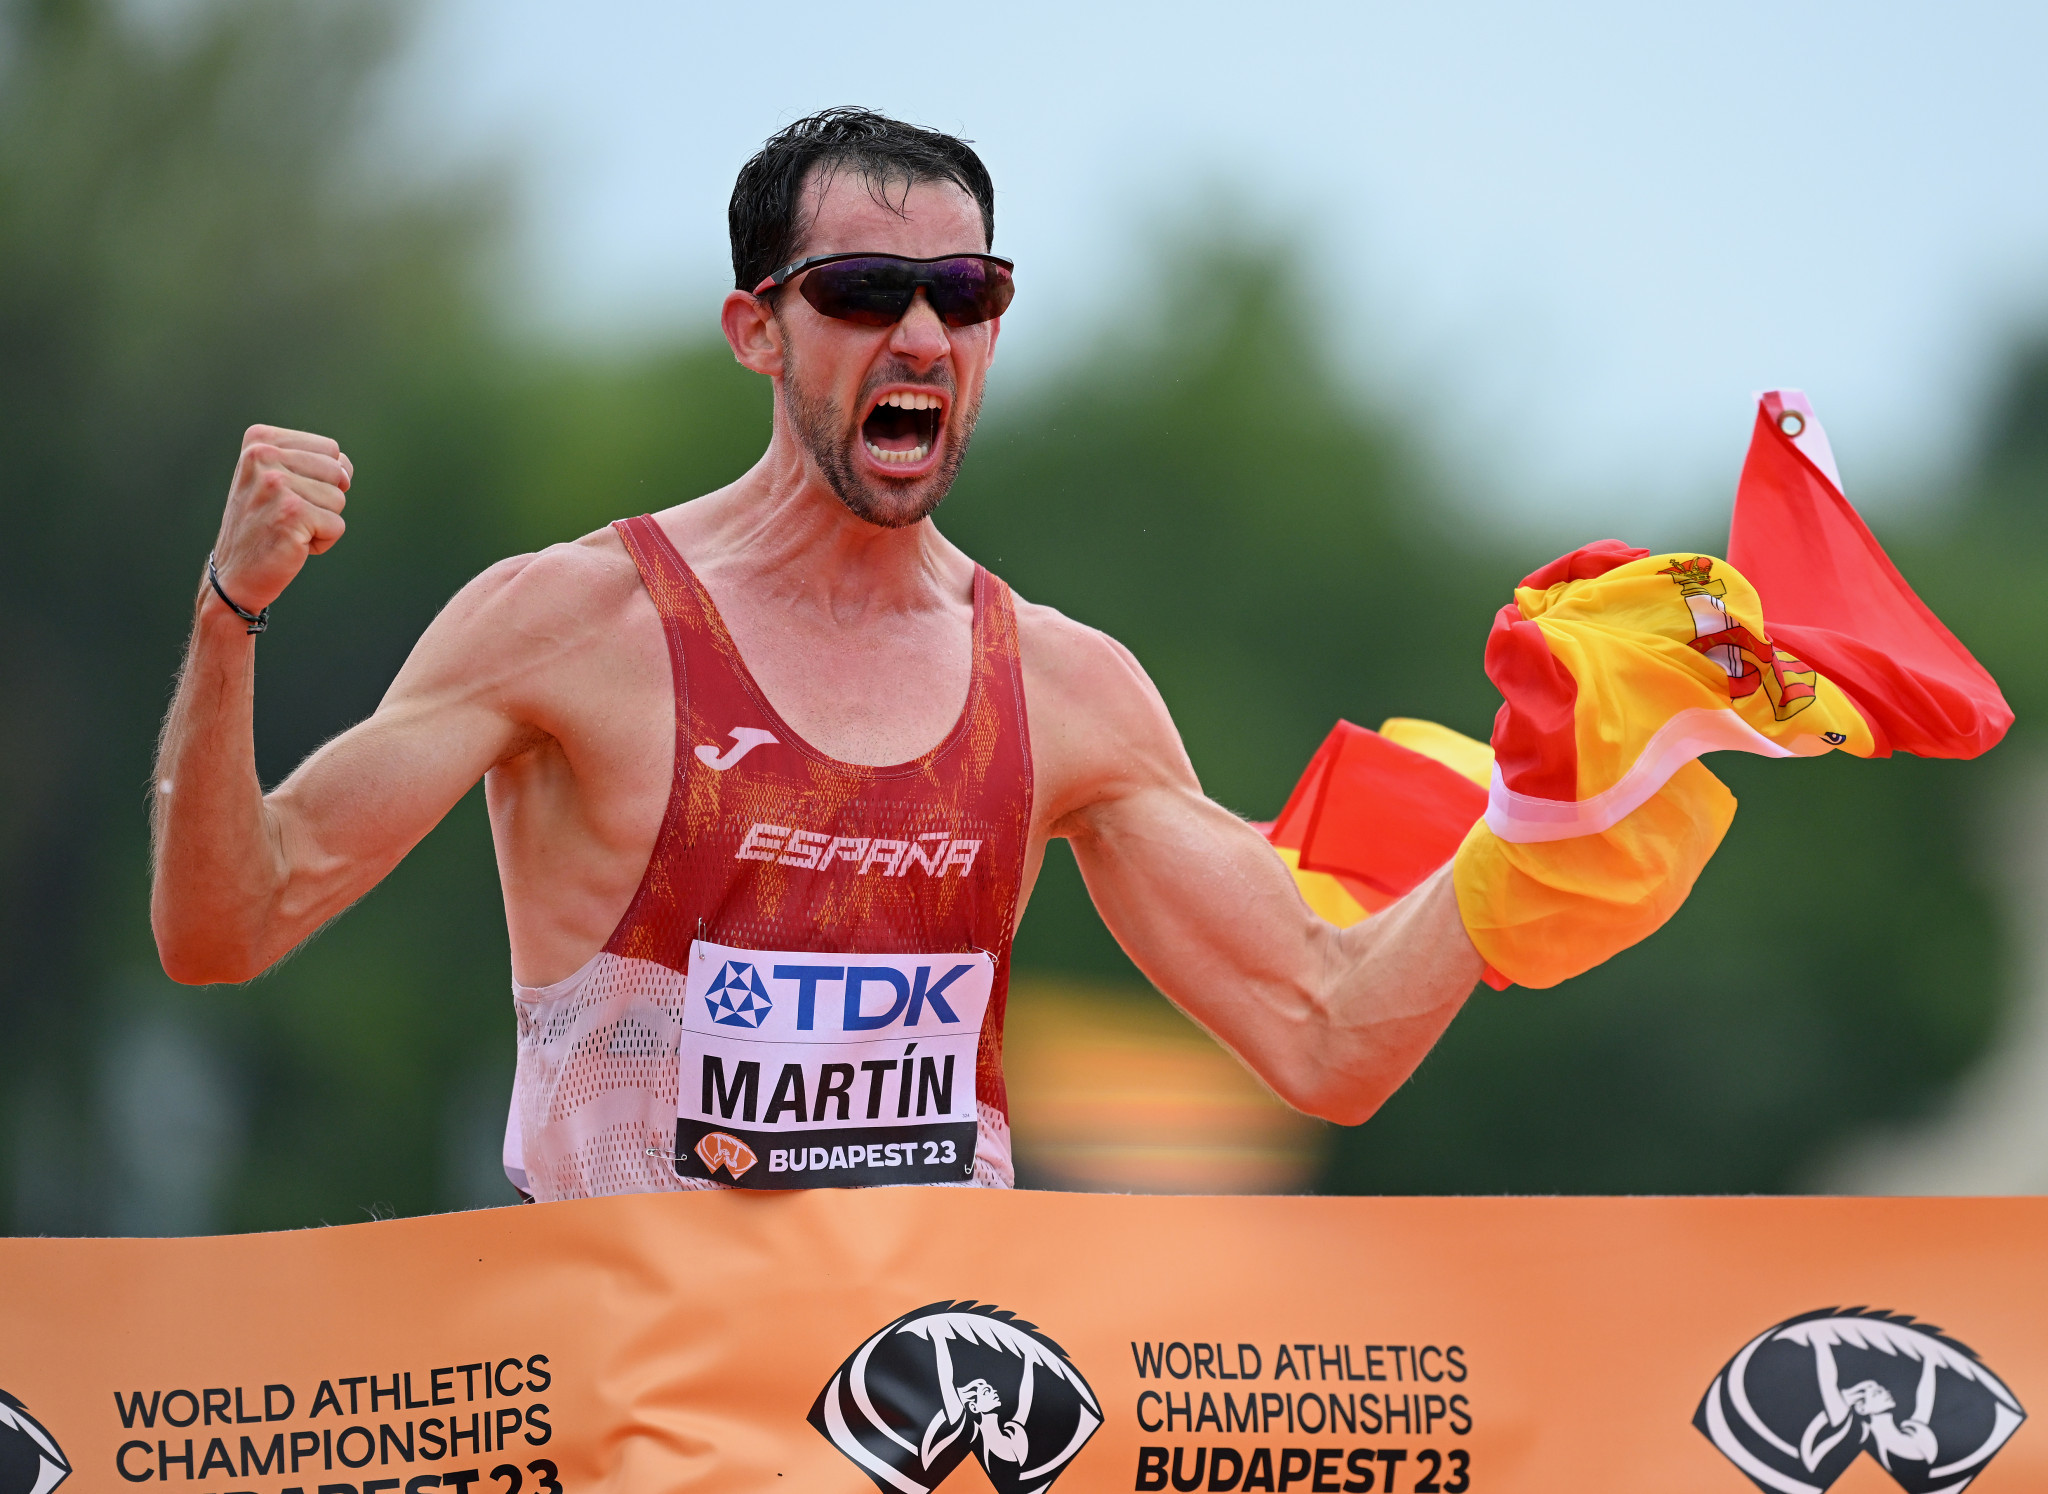 Spain's Álvaro Martín took the first gold of the World Athletics Championships in the men's 20km race walk ©Getty Images